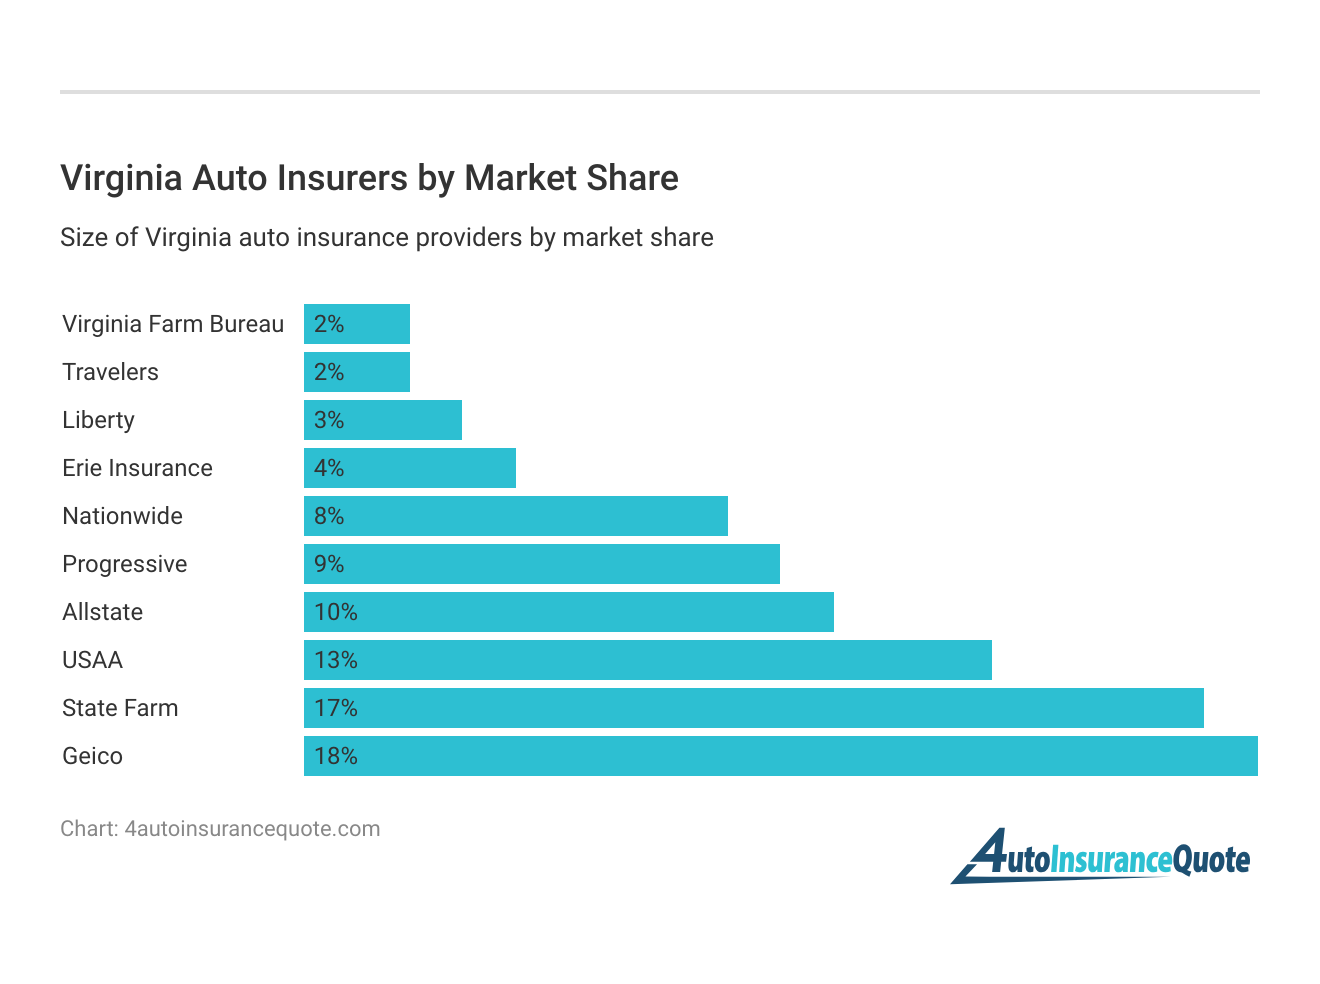 <h3>Virginia Auto Insurers by Market Share</h3>